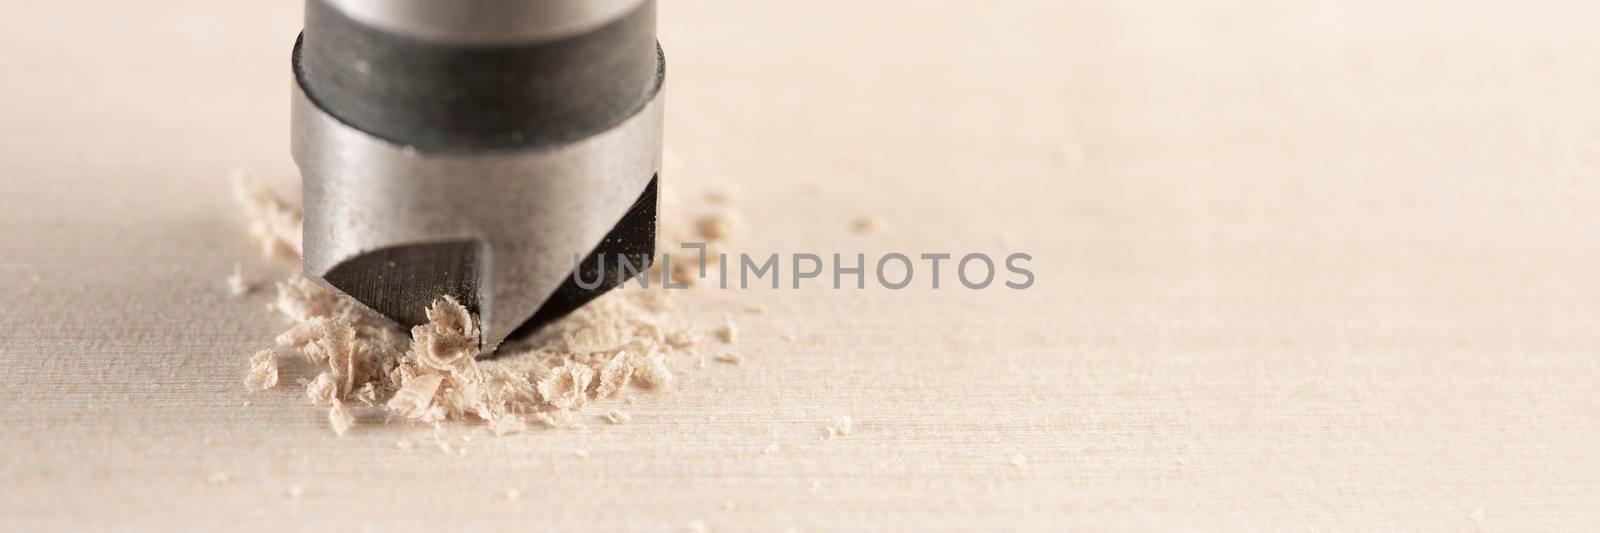 Countersink for deepening the self-tapping screw. A countersink drill makes a recess in a hole for a screw in a wooden board